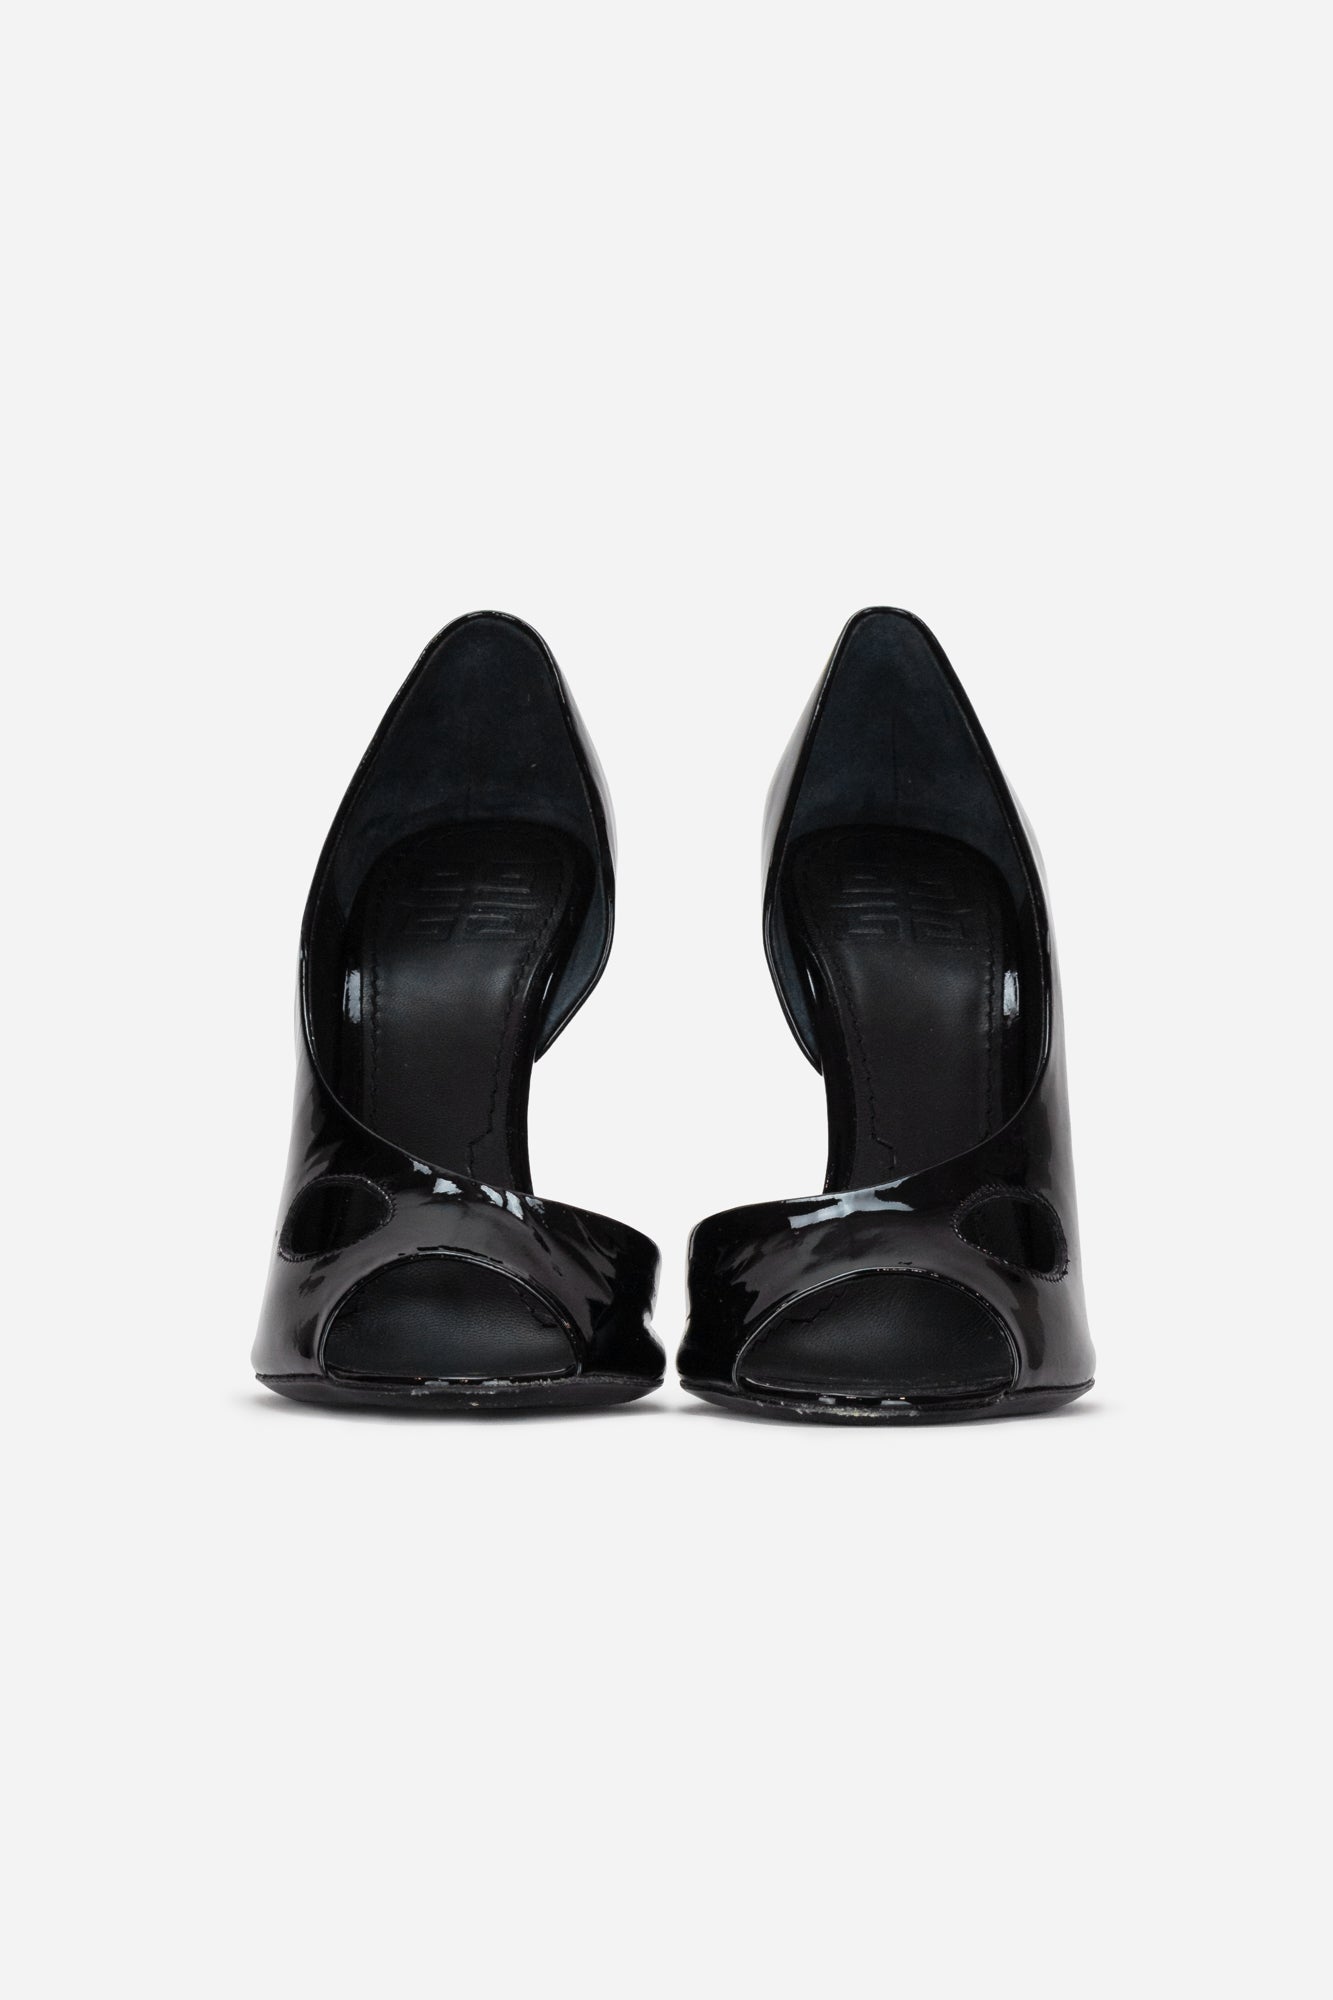 Black pumps with cut outs Patent leather